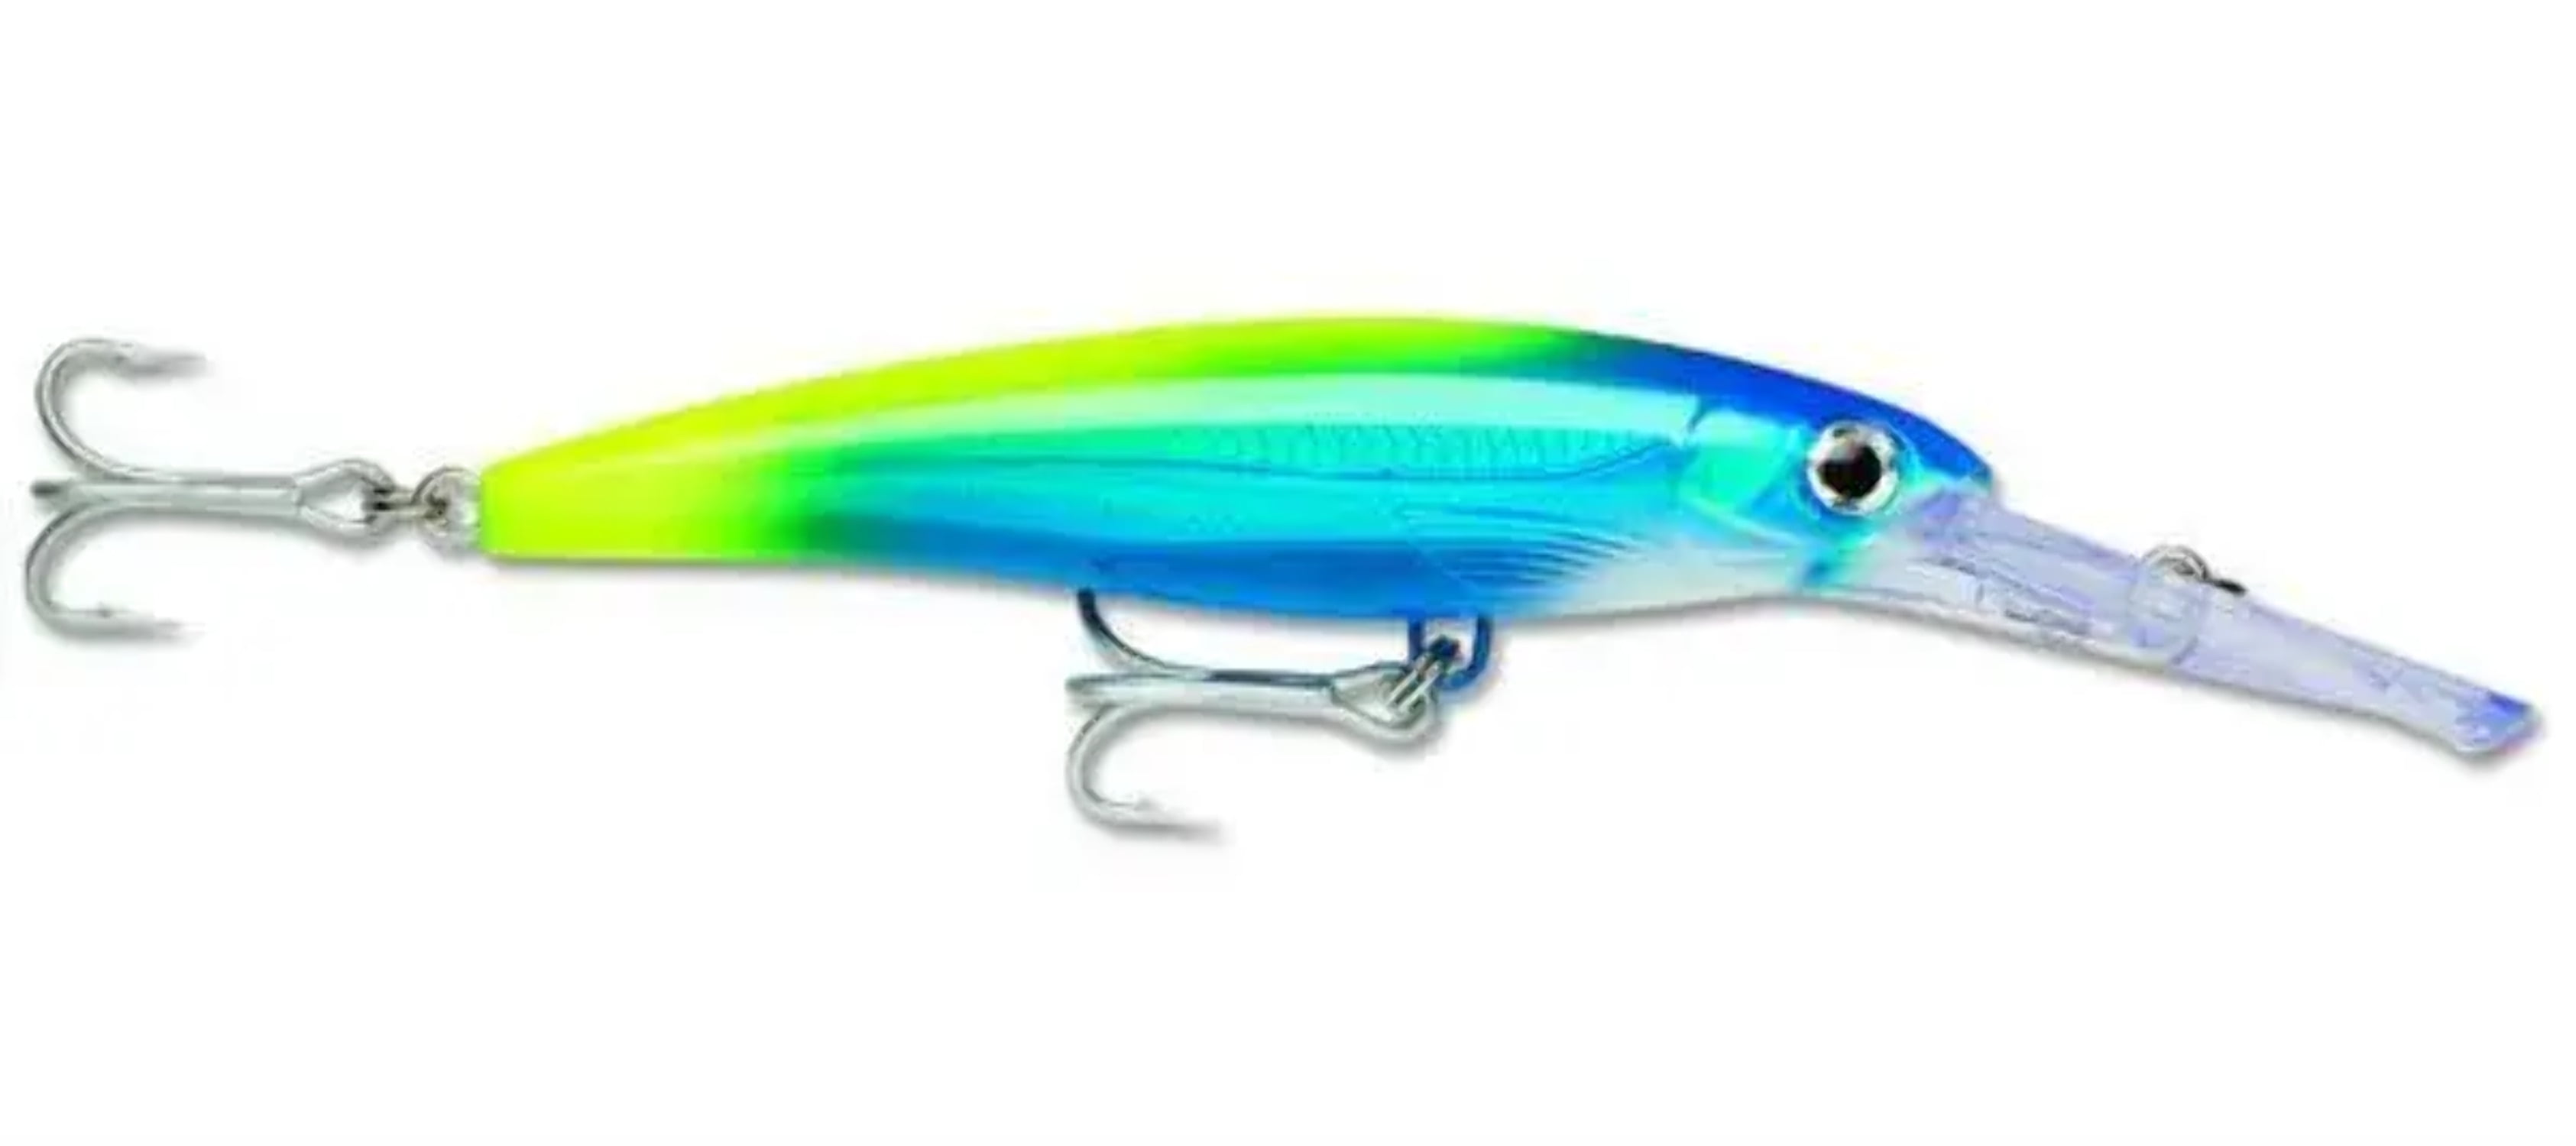 Rapala X-Rap Magnum 10 Fishing Lure - Spotted Minnow - 10 Ft